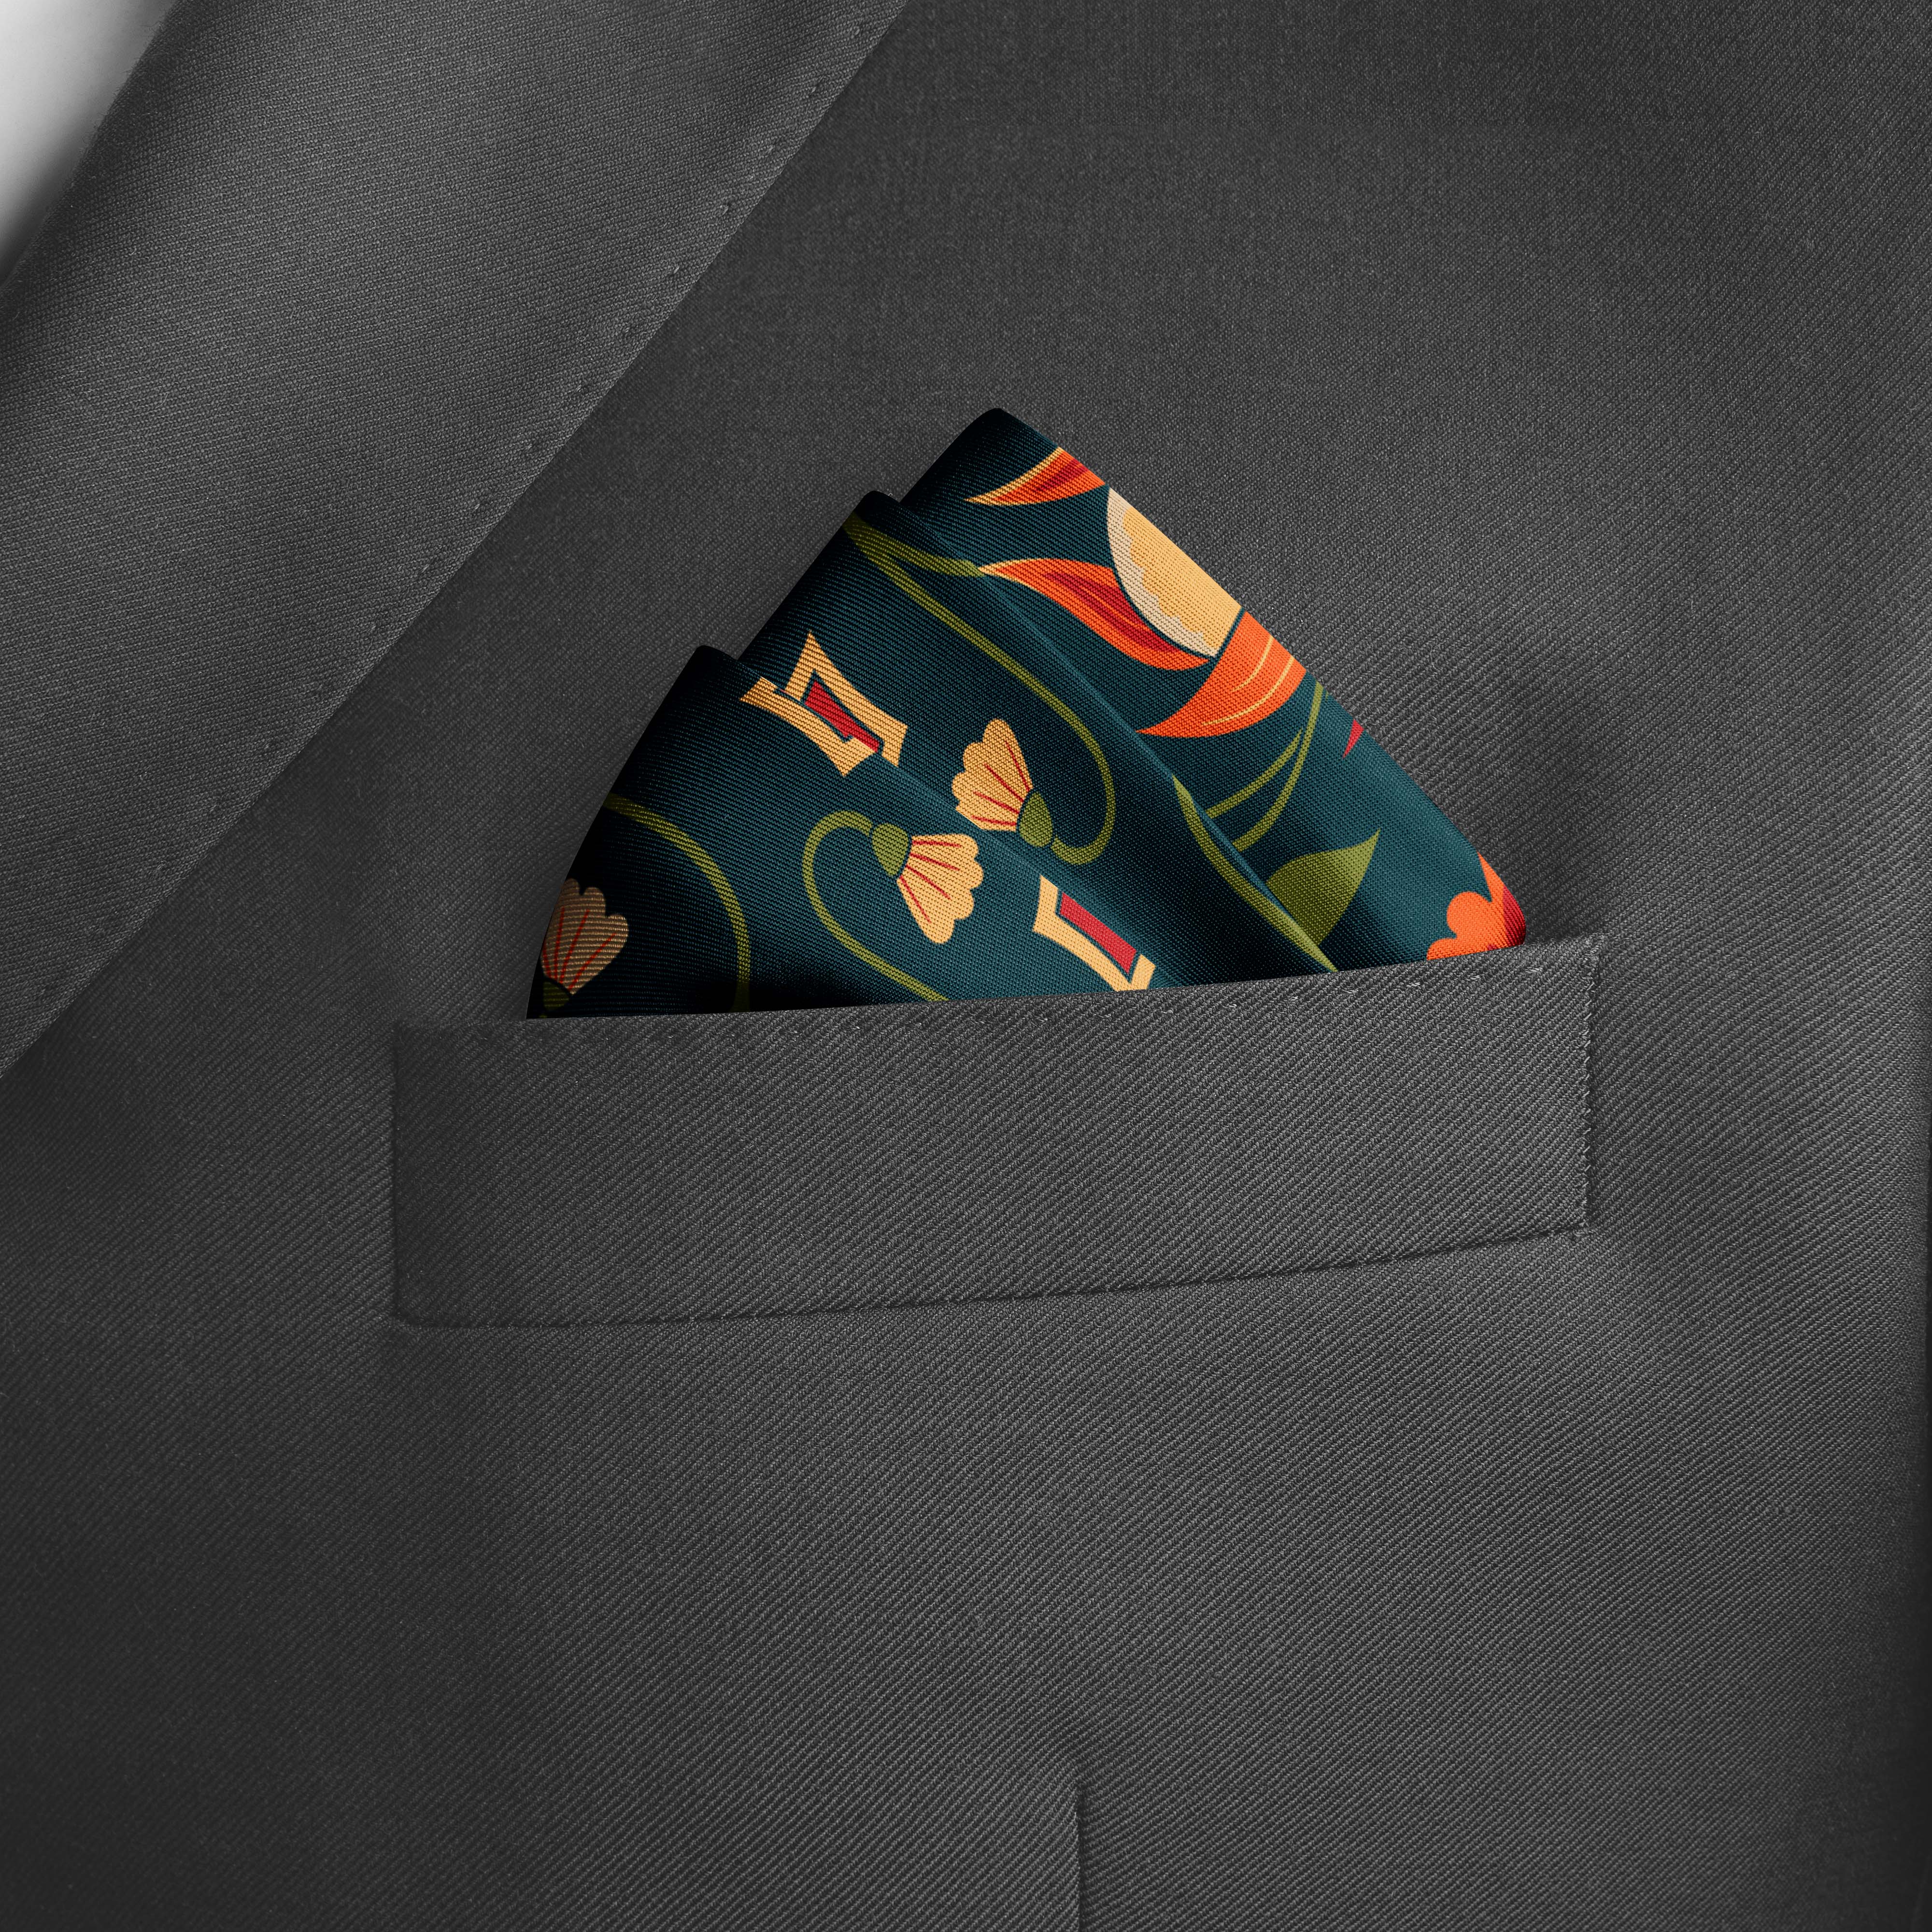 FLOWERS AND LEAVES SILK POCKET SQUARE